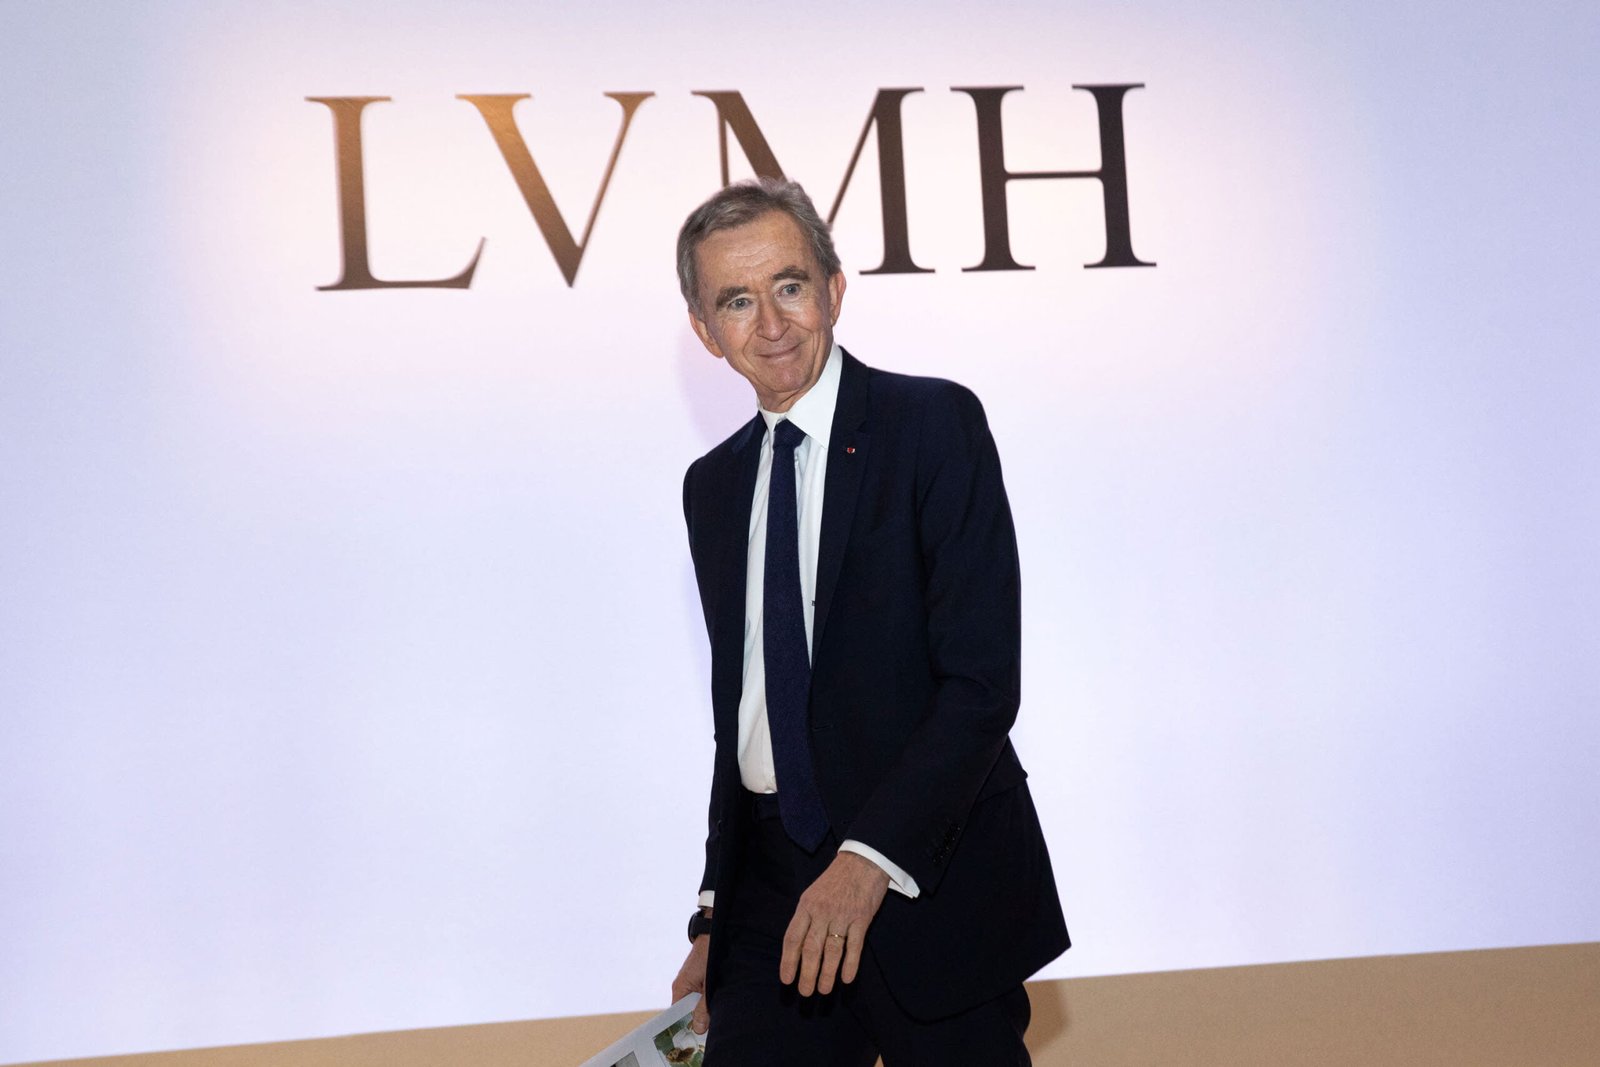 LVMH CEO Bernard Arnault and his wife Helene upon arrival to the